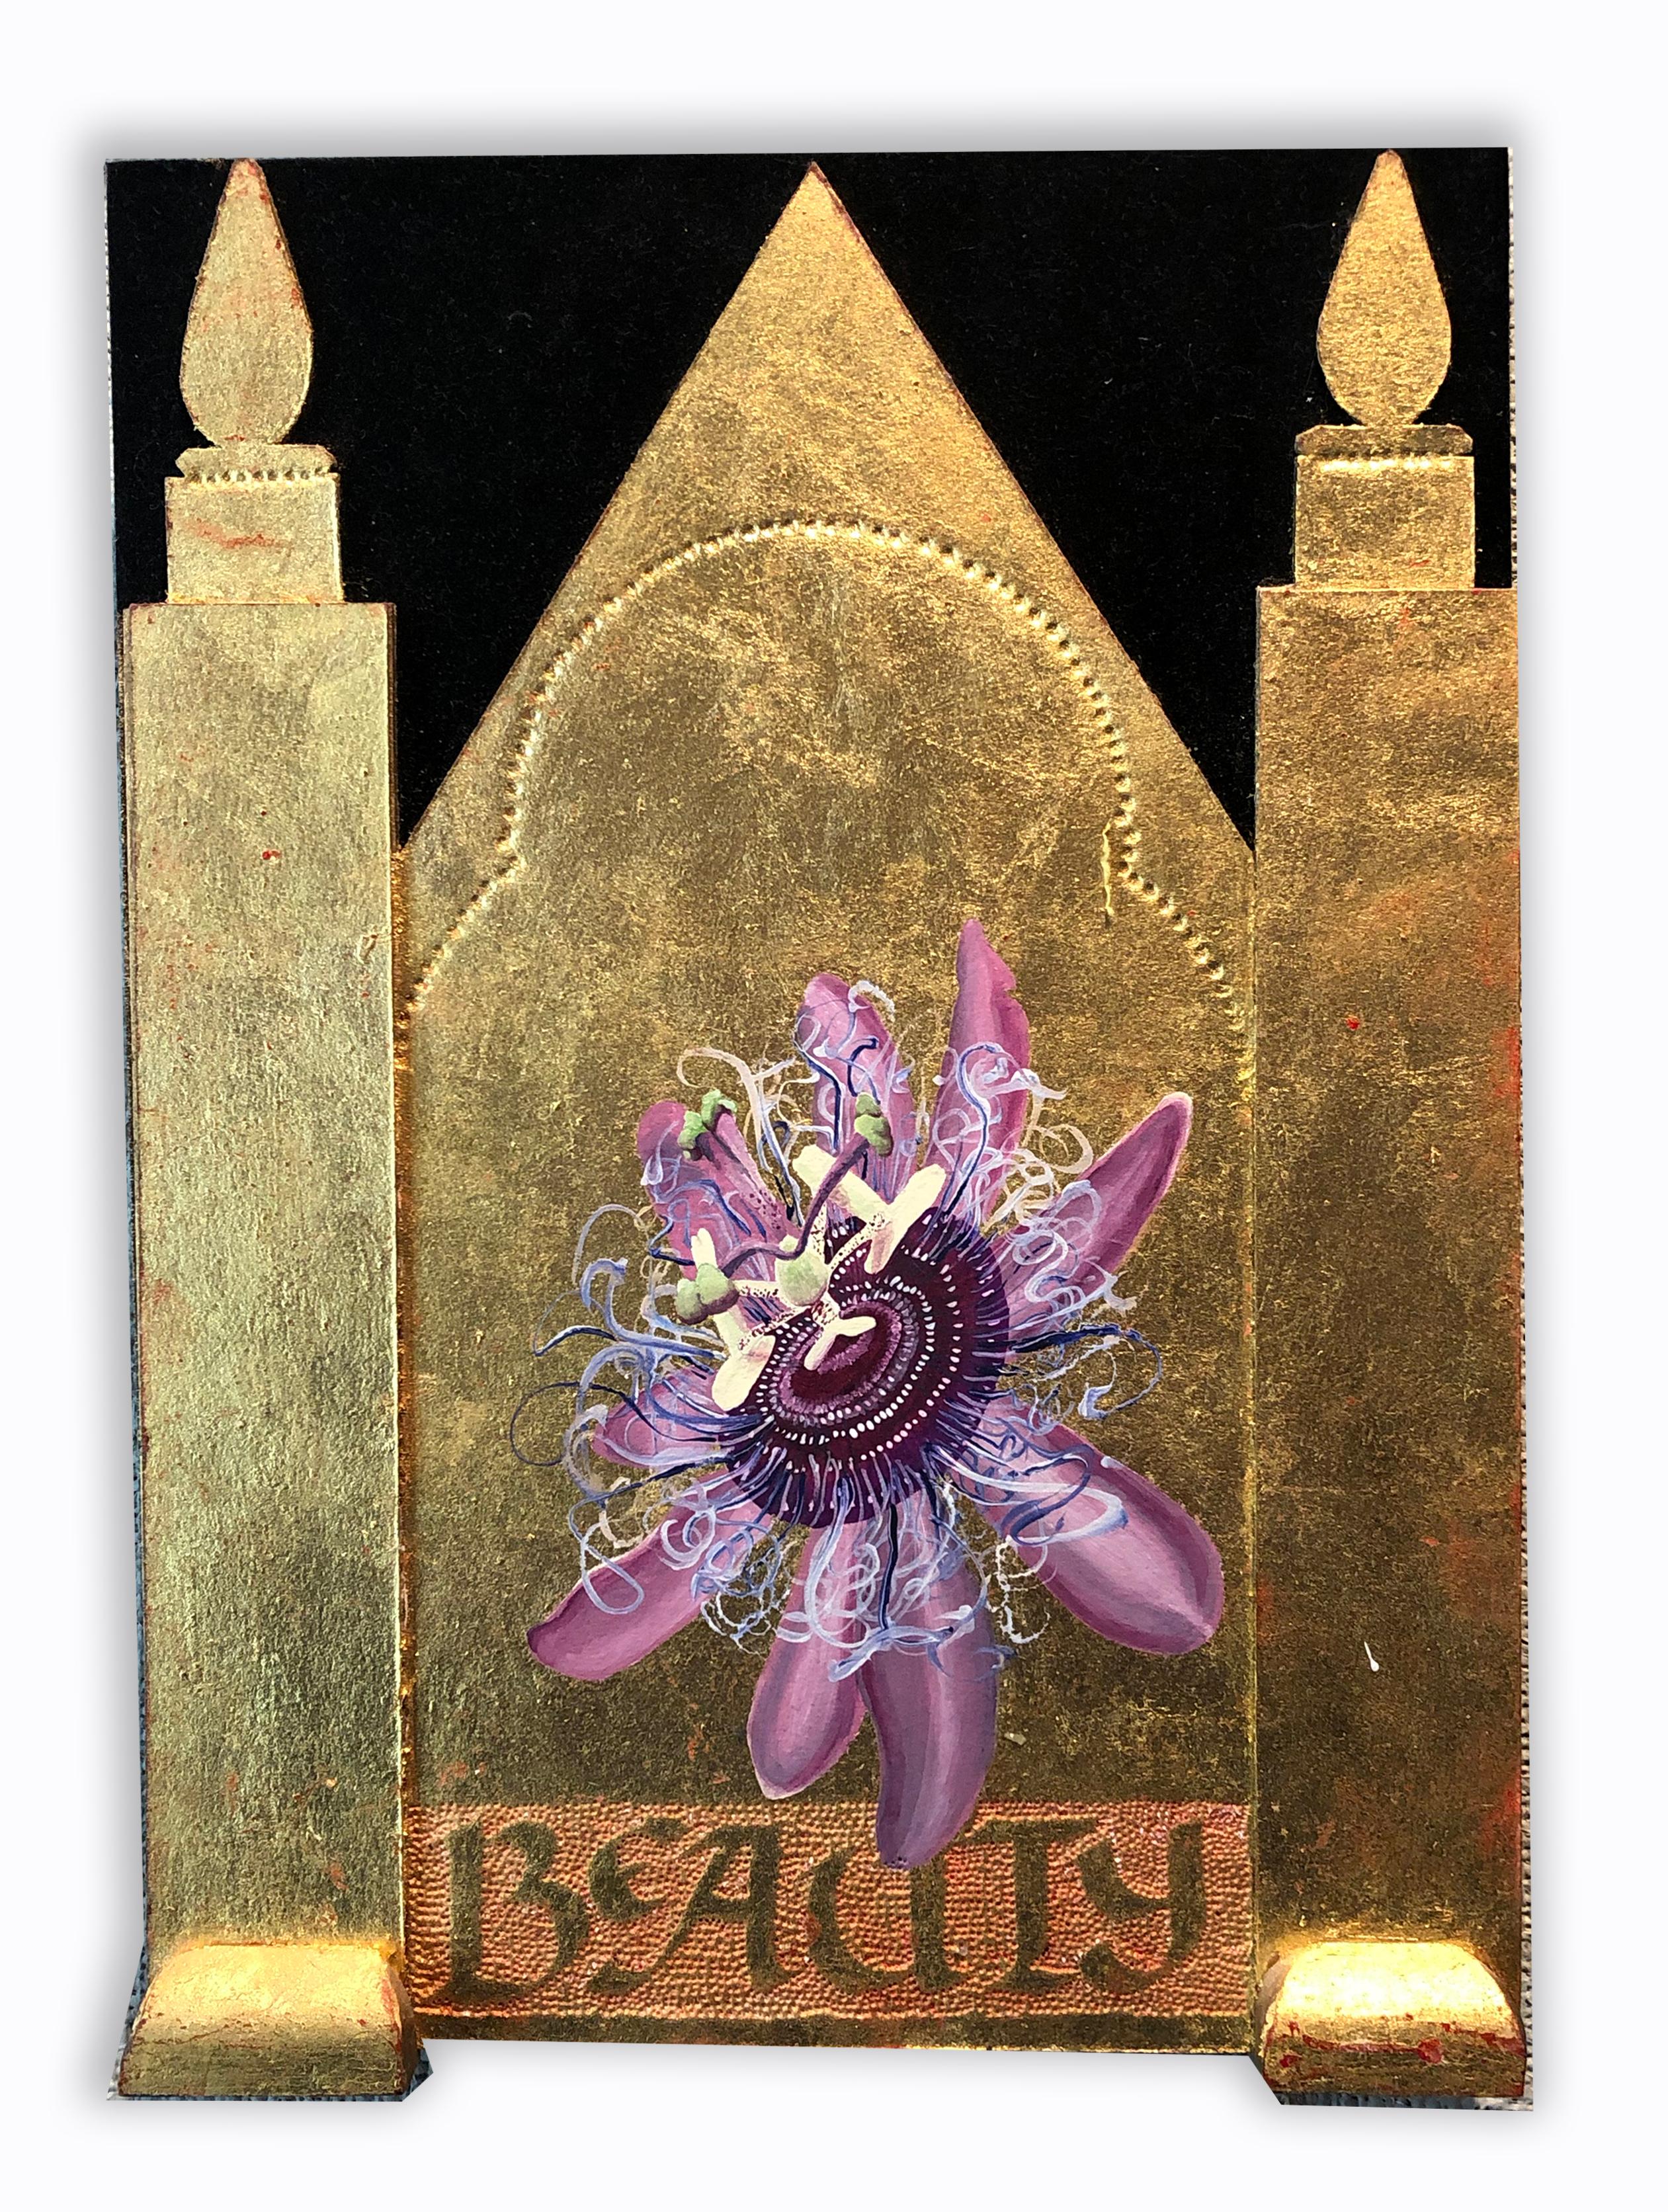 Contemporary mixed media gold leaf purple pop art text floral wall sculpture - Mixed Media Art by Rosemary Lyons